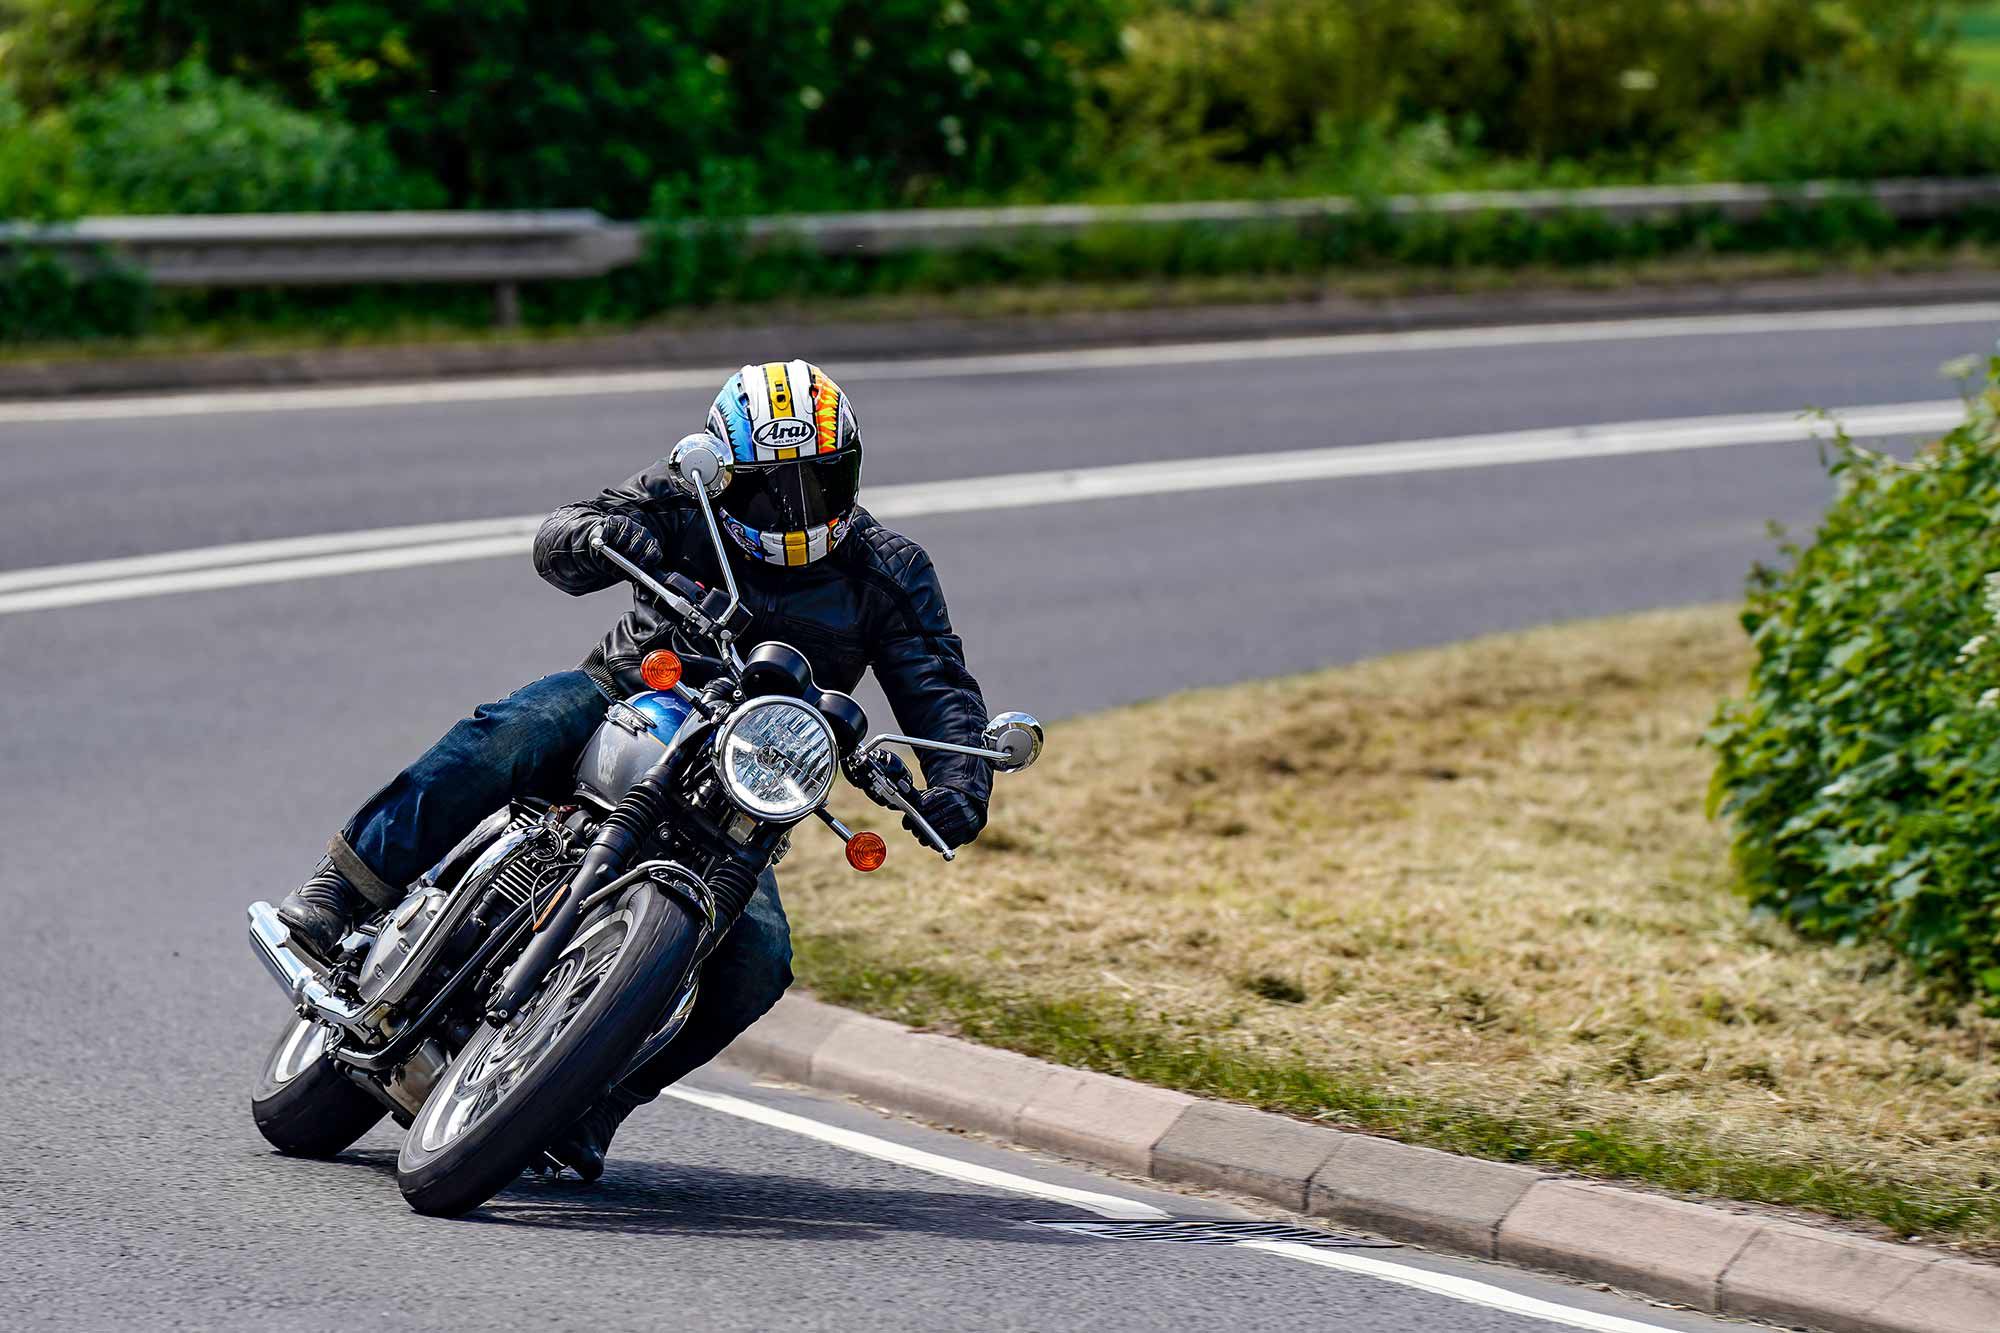 The lower capacity of the T100 results in lower peak power (by 11 bhp) and torque (16 pound-feet) that’s also produced higher up in the rev range. The T100 has a less attractive spec too, with just a single front brake disc, no electronic riding mode options, and no cruise control—but it is $1,550 cheaper.